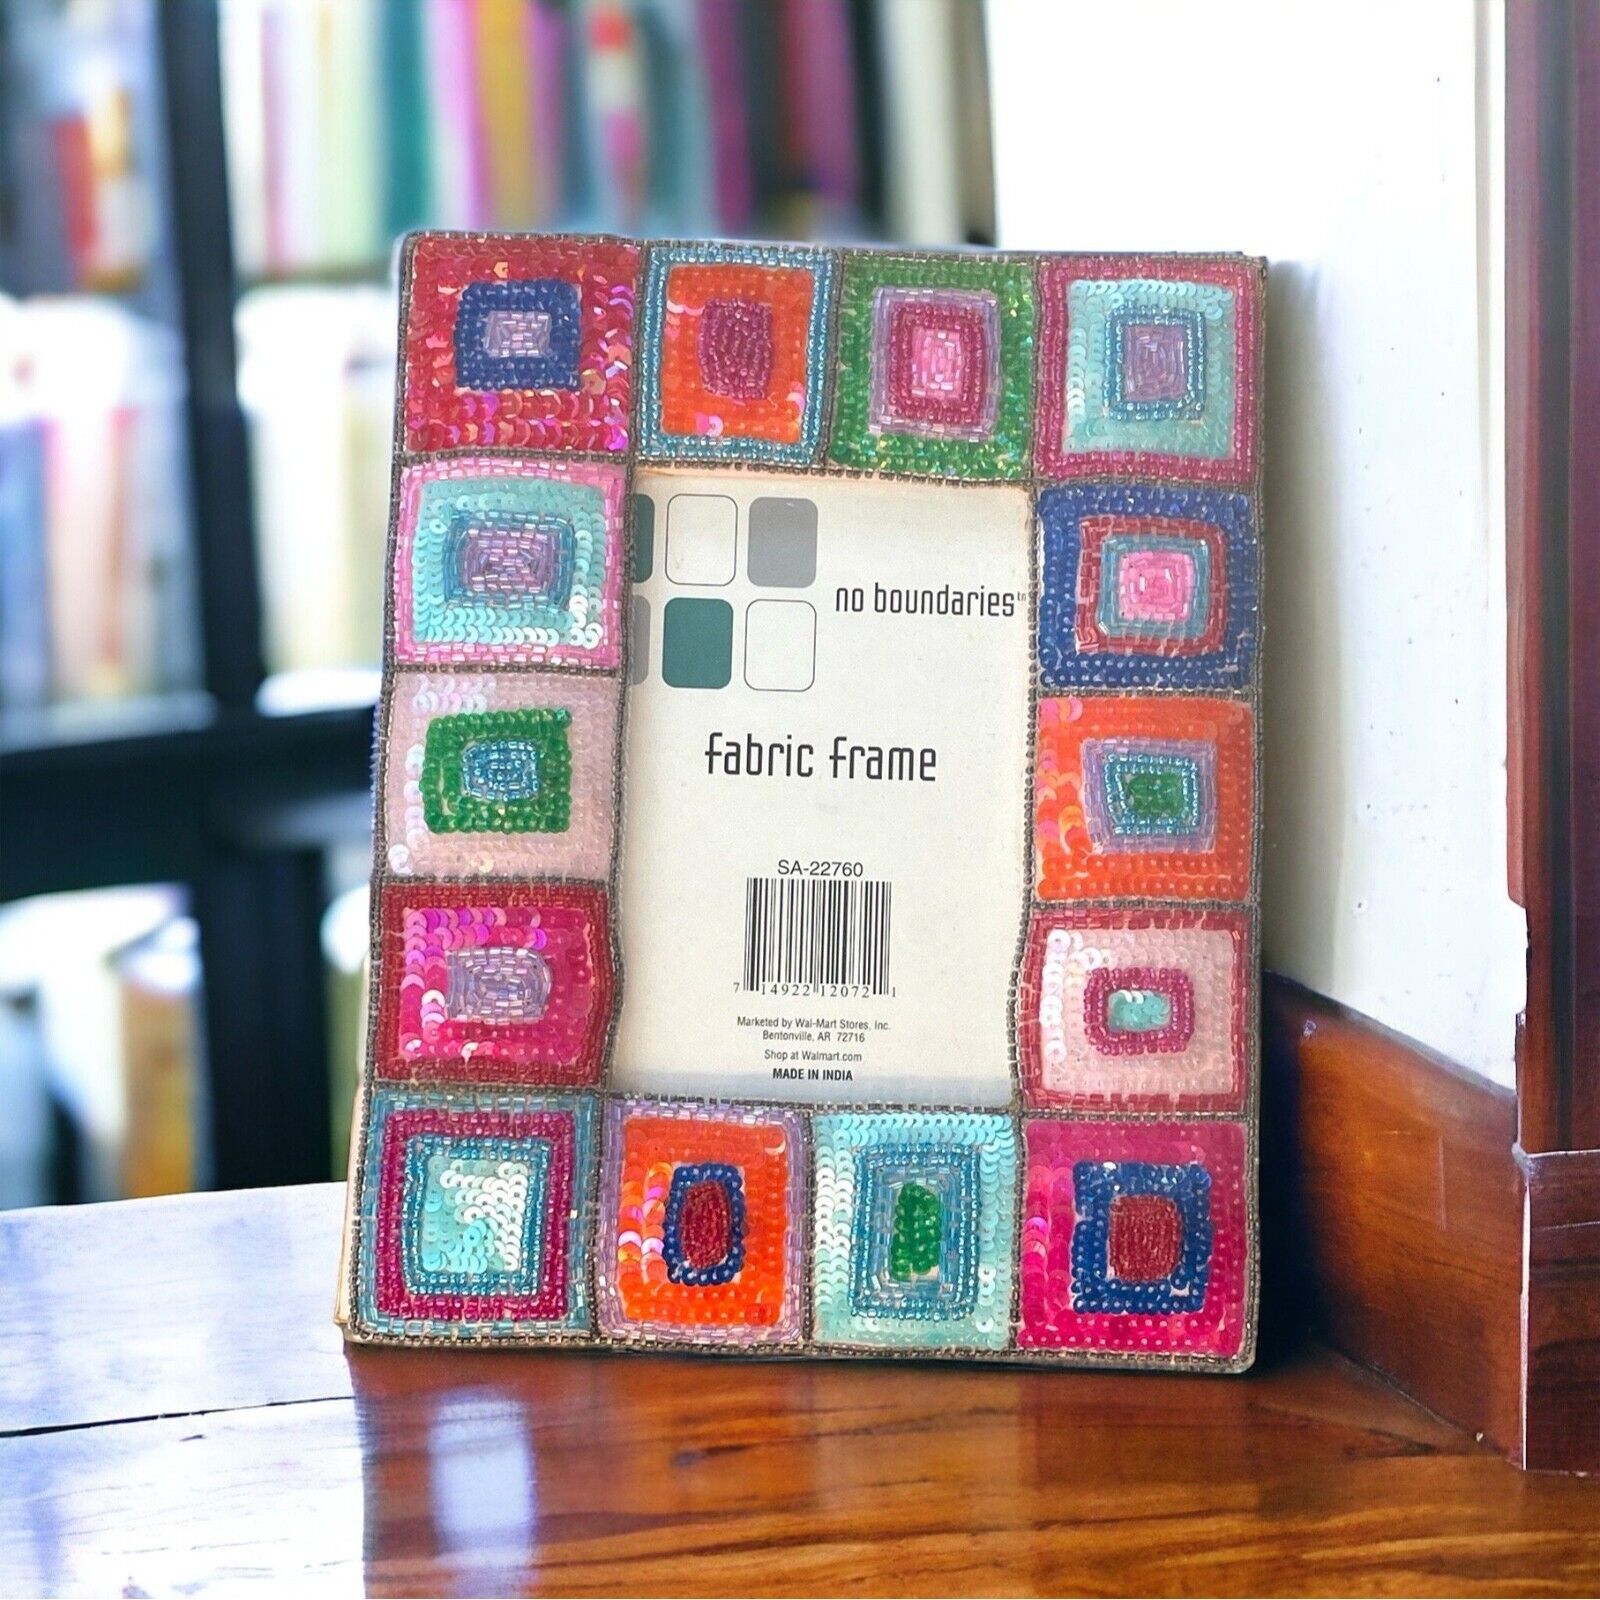 Stunning vintage sequined geometric picture frame